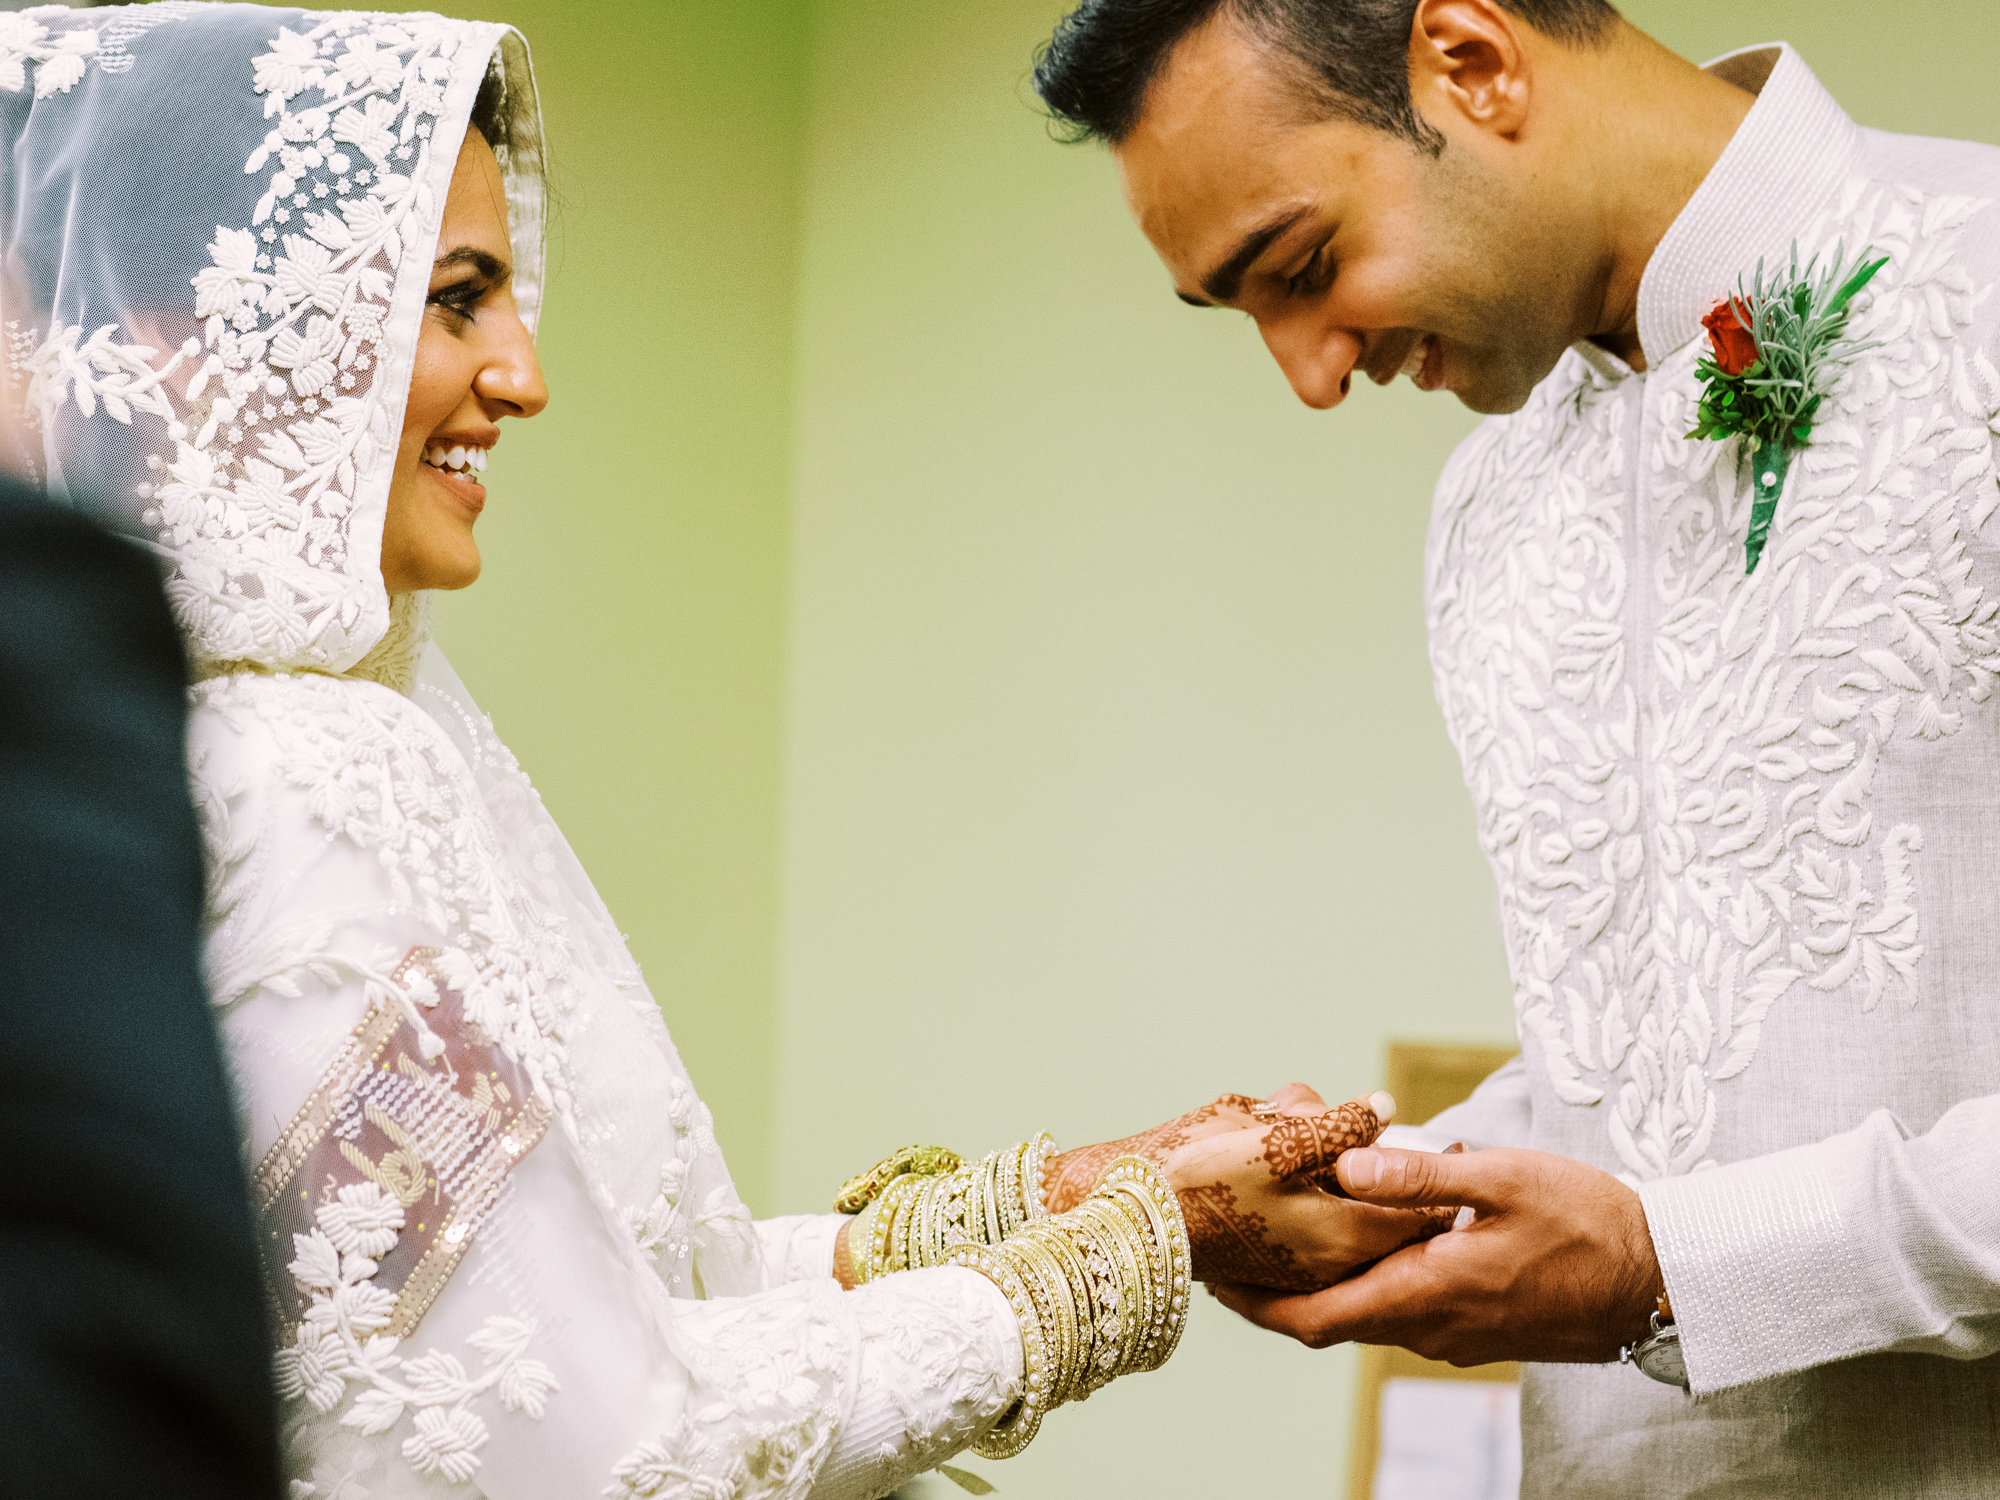 Seattle Indian Muslim wedding photographer: Ateqah getting ready for Nikkah